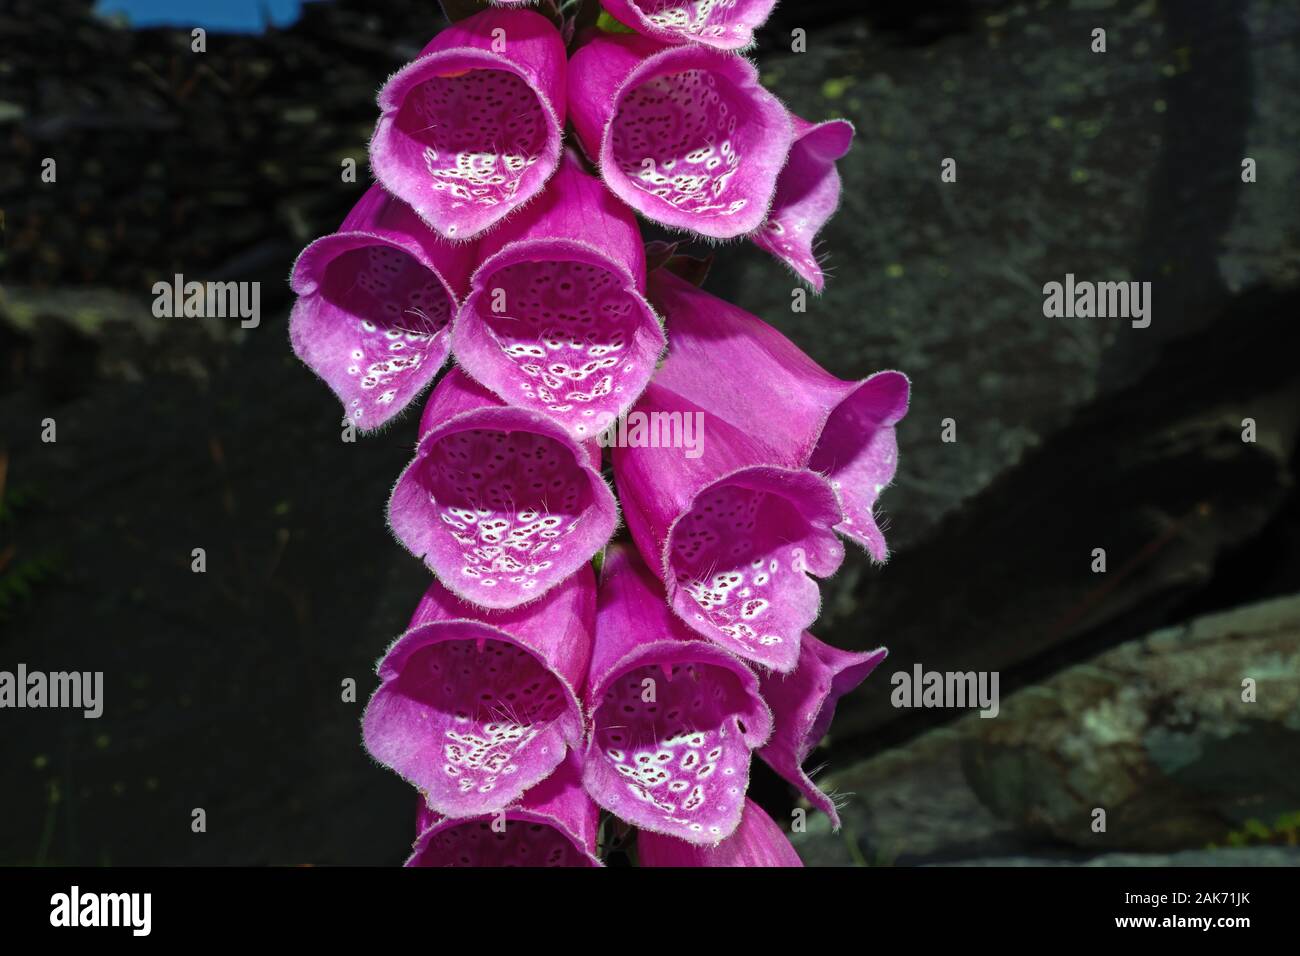 Digitalis purpurea (foxglove) is widespread throughout most of temperate Europe where it can be found in acid grasslands and heathland. Stock Photo